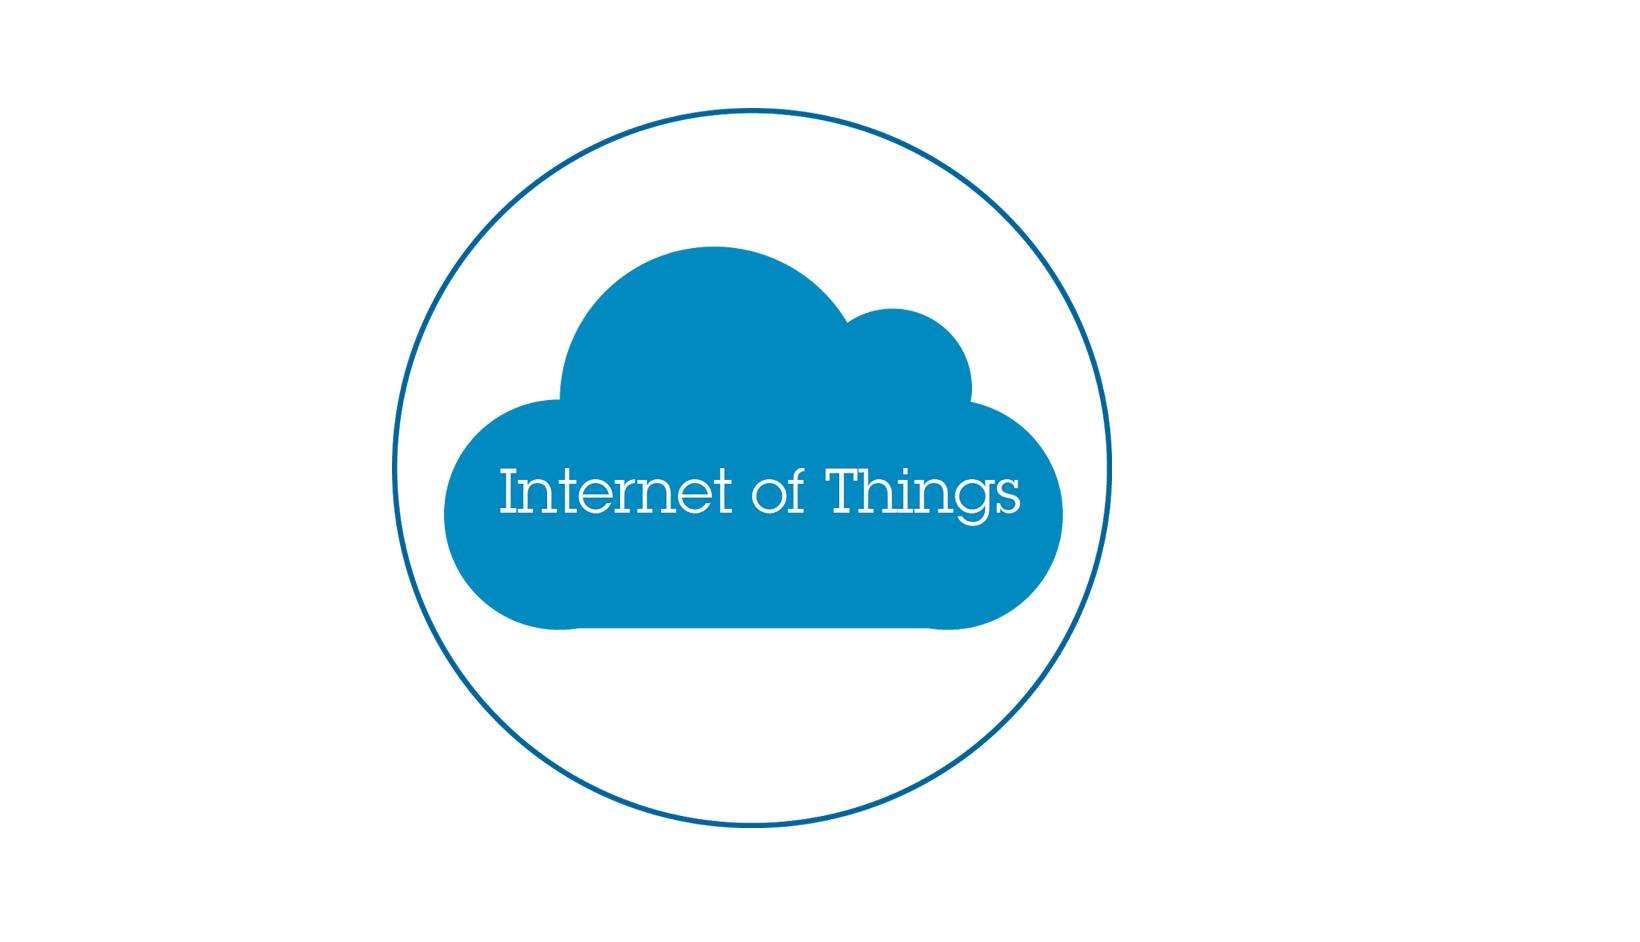 3 Customer-centric Applications of IoT